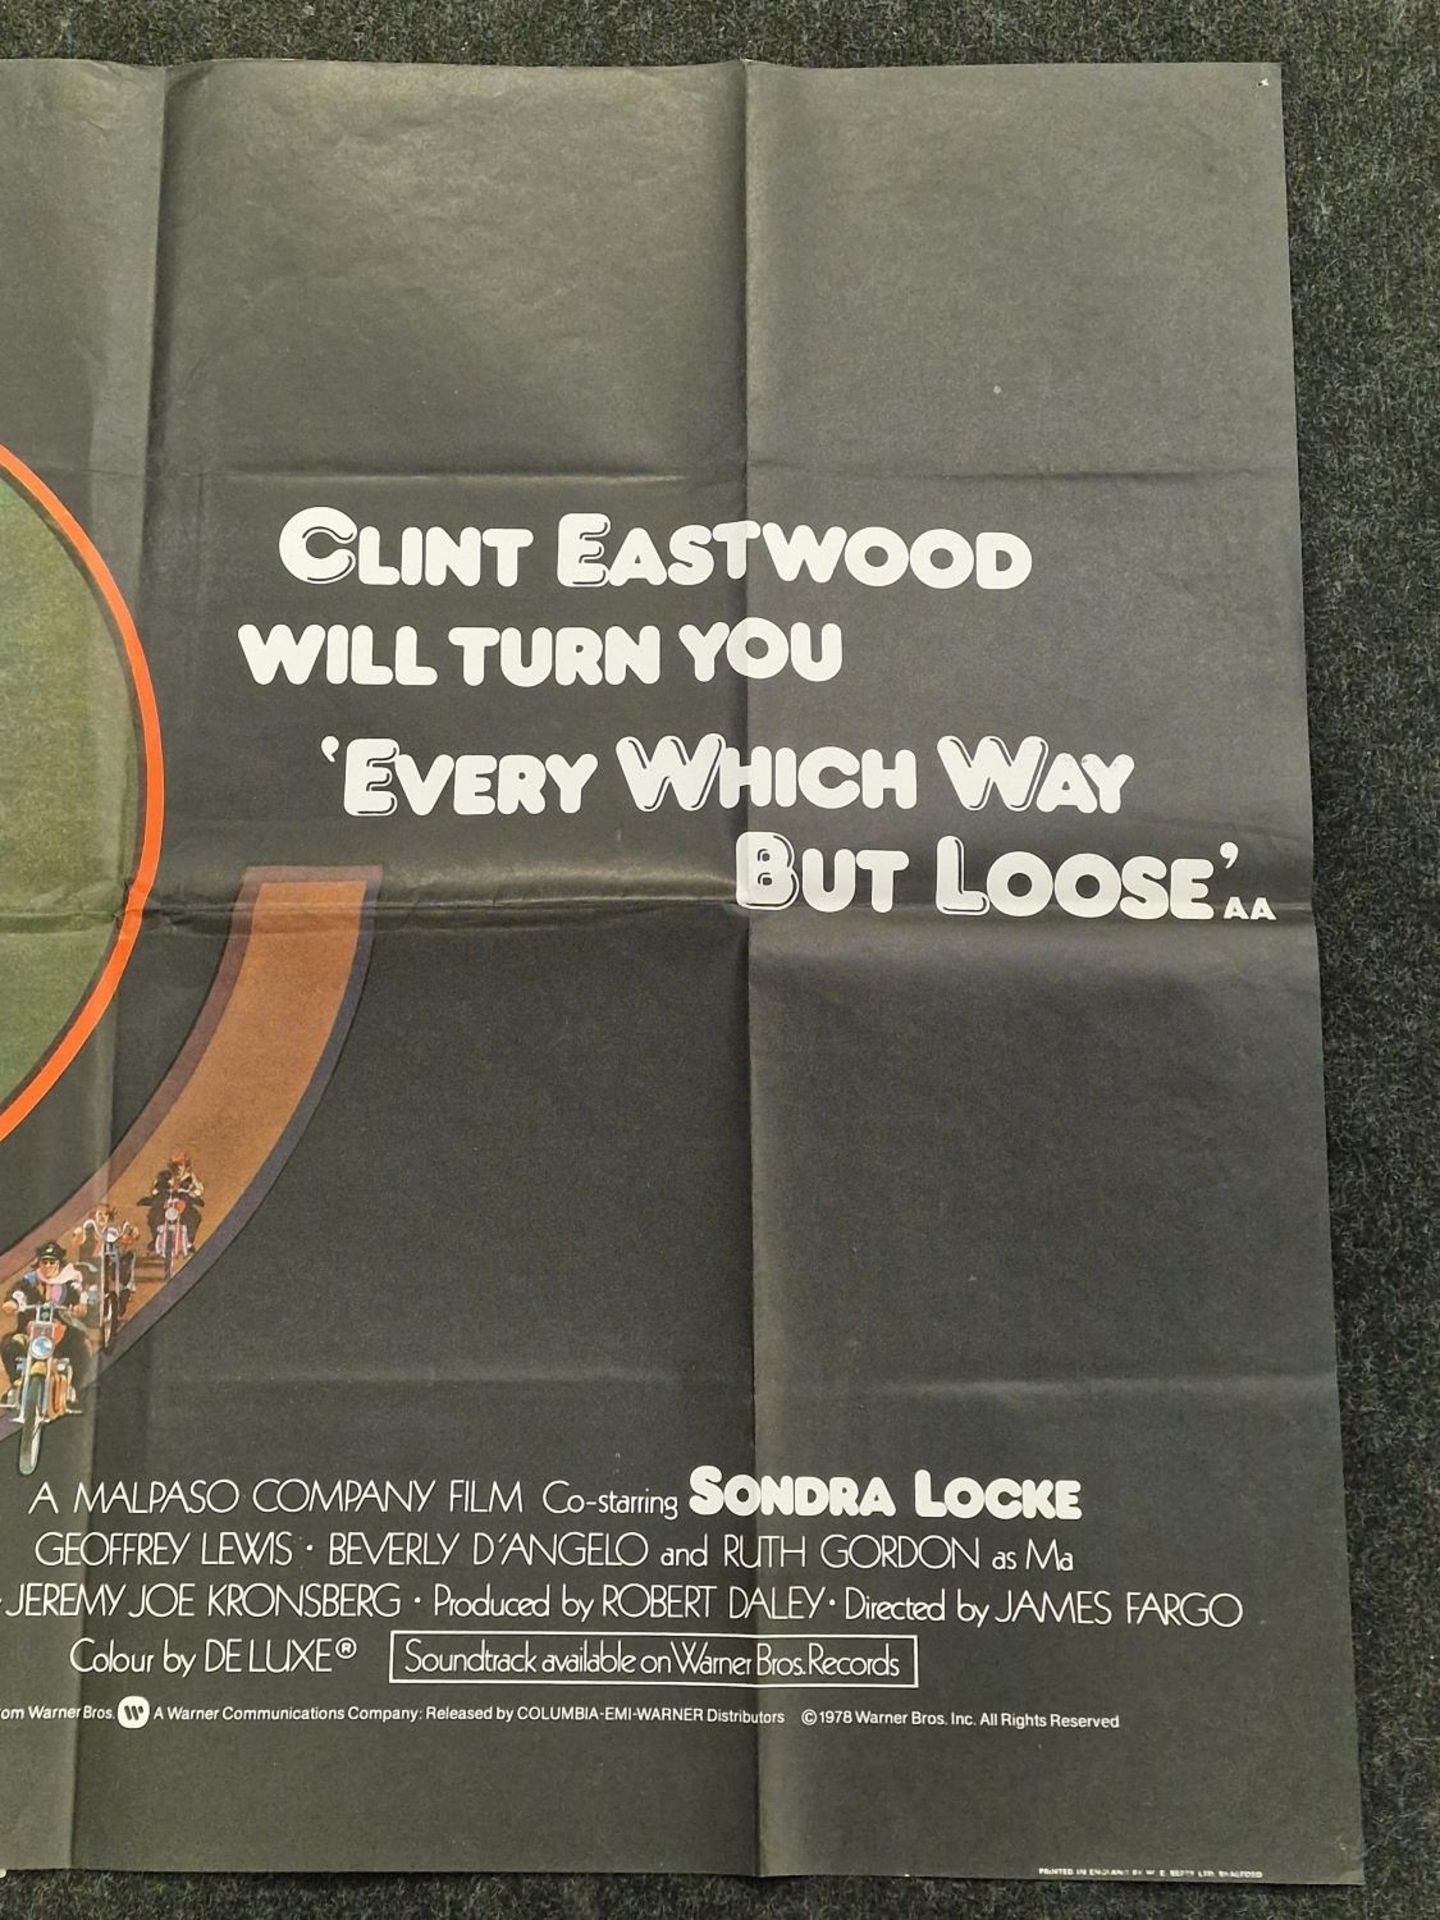 "Every Which Way But Loose" original vintage folded quad film poster 1978 starring Clint Eastwood - Image 3 of 5